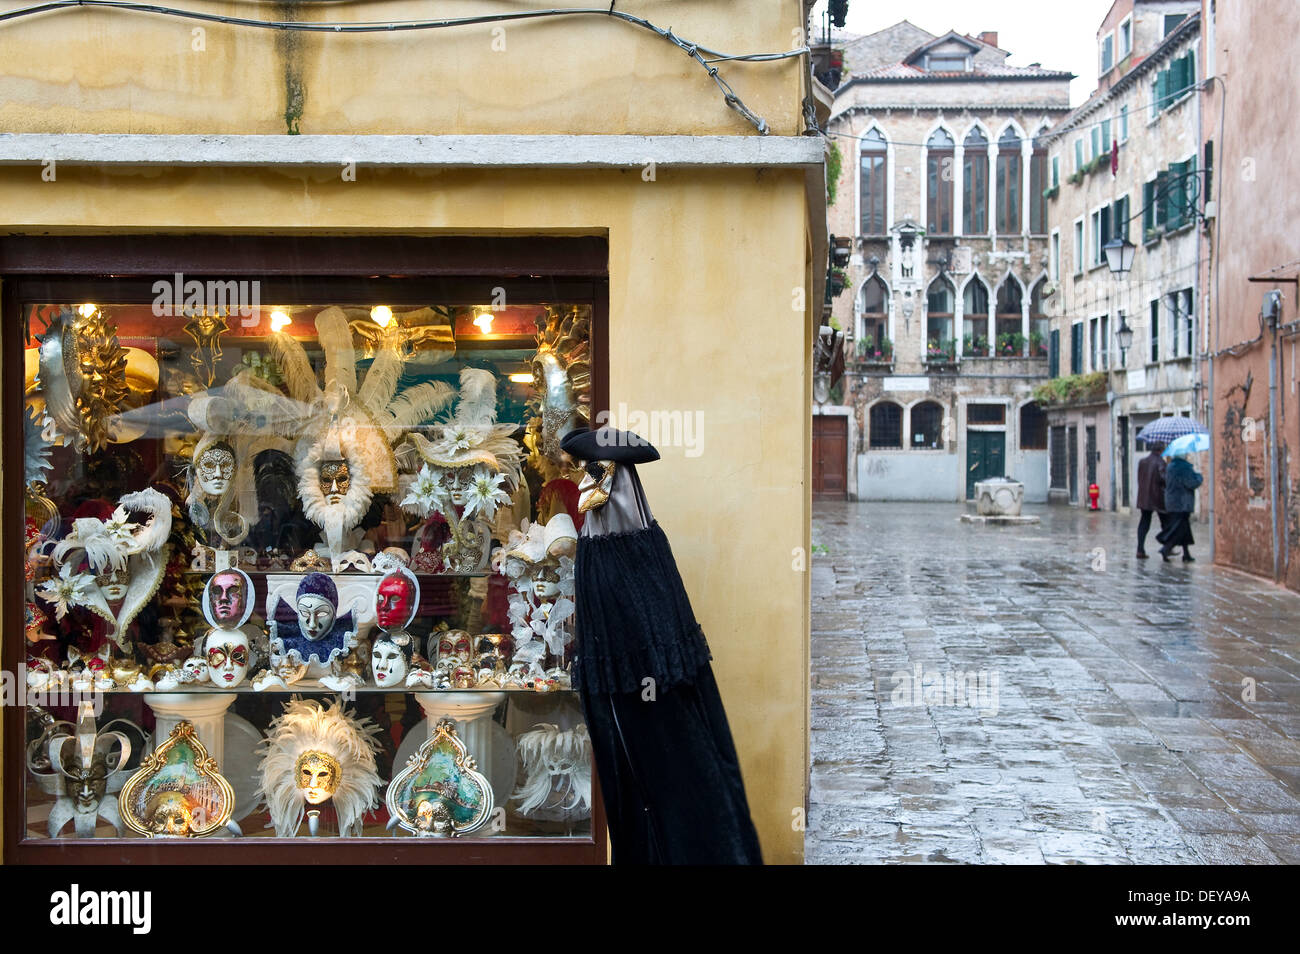 Shop selling carnival masks, Venice, Italy, Europe Stock Photo